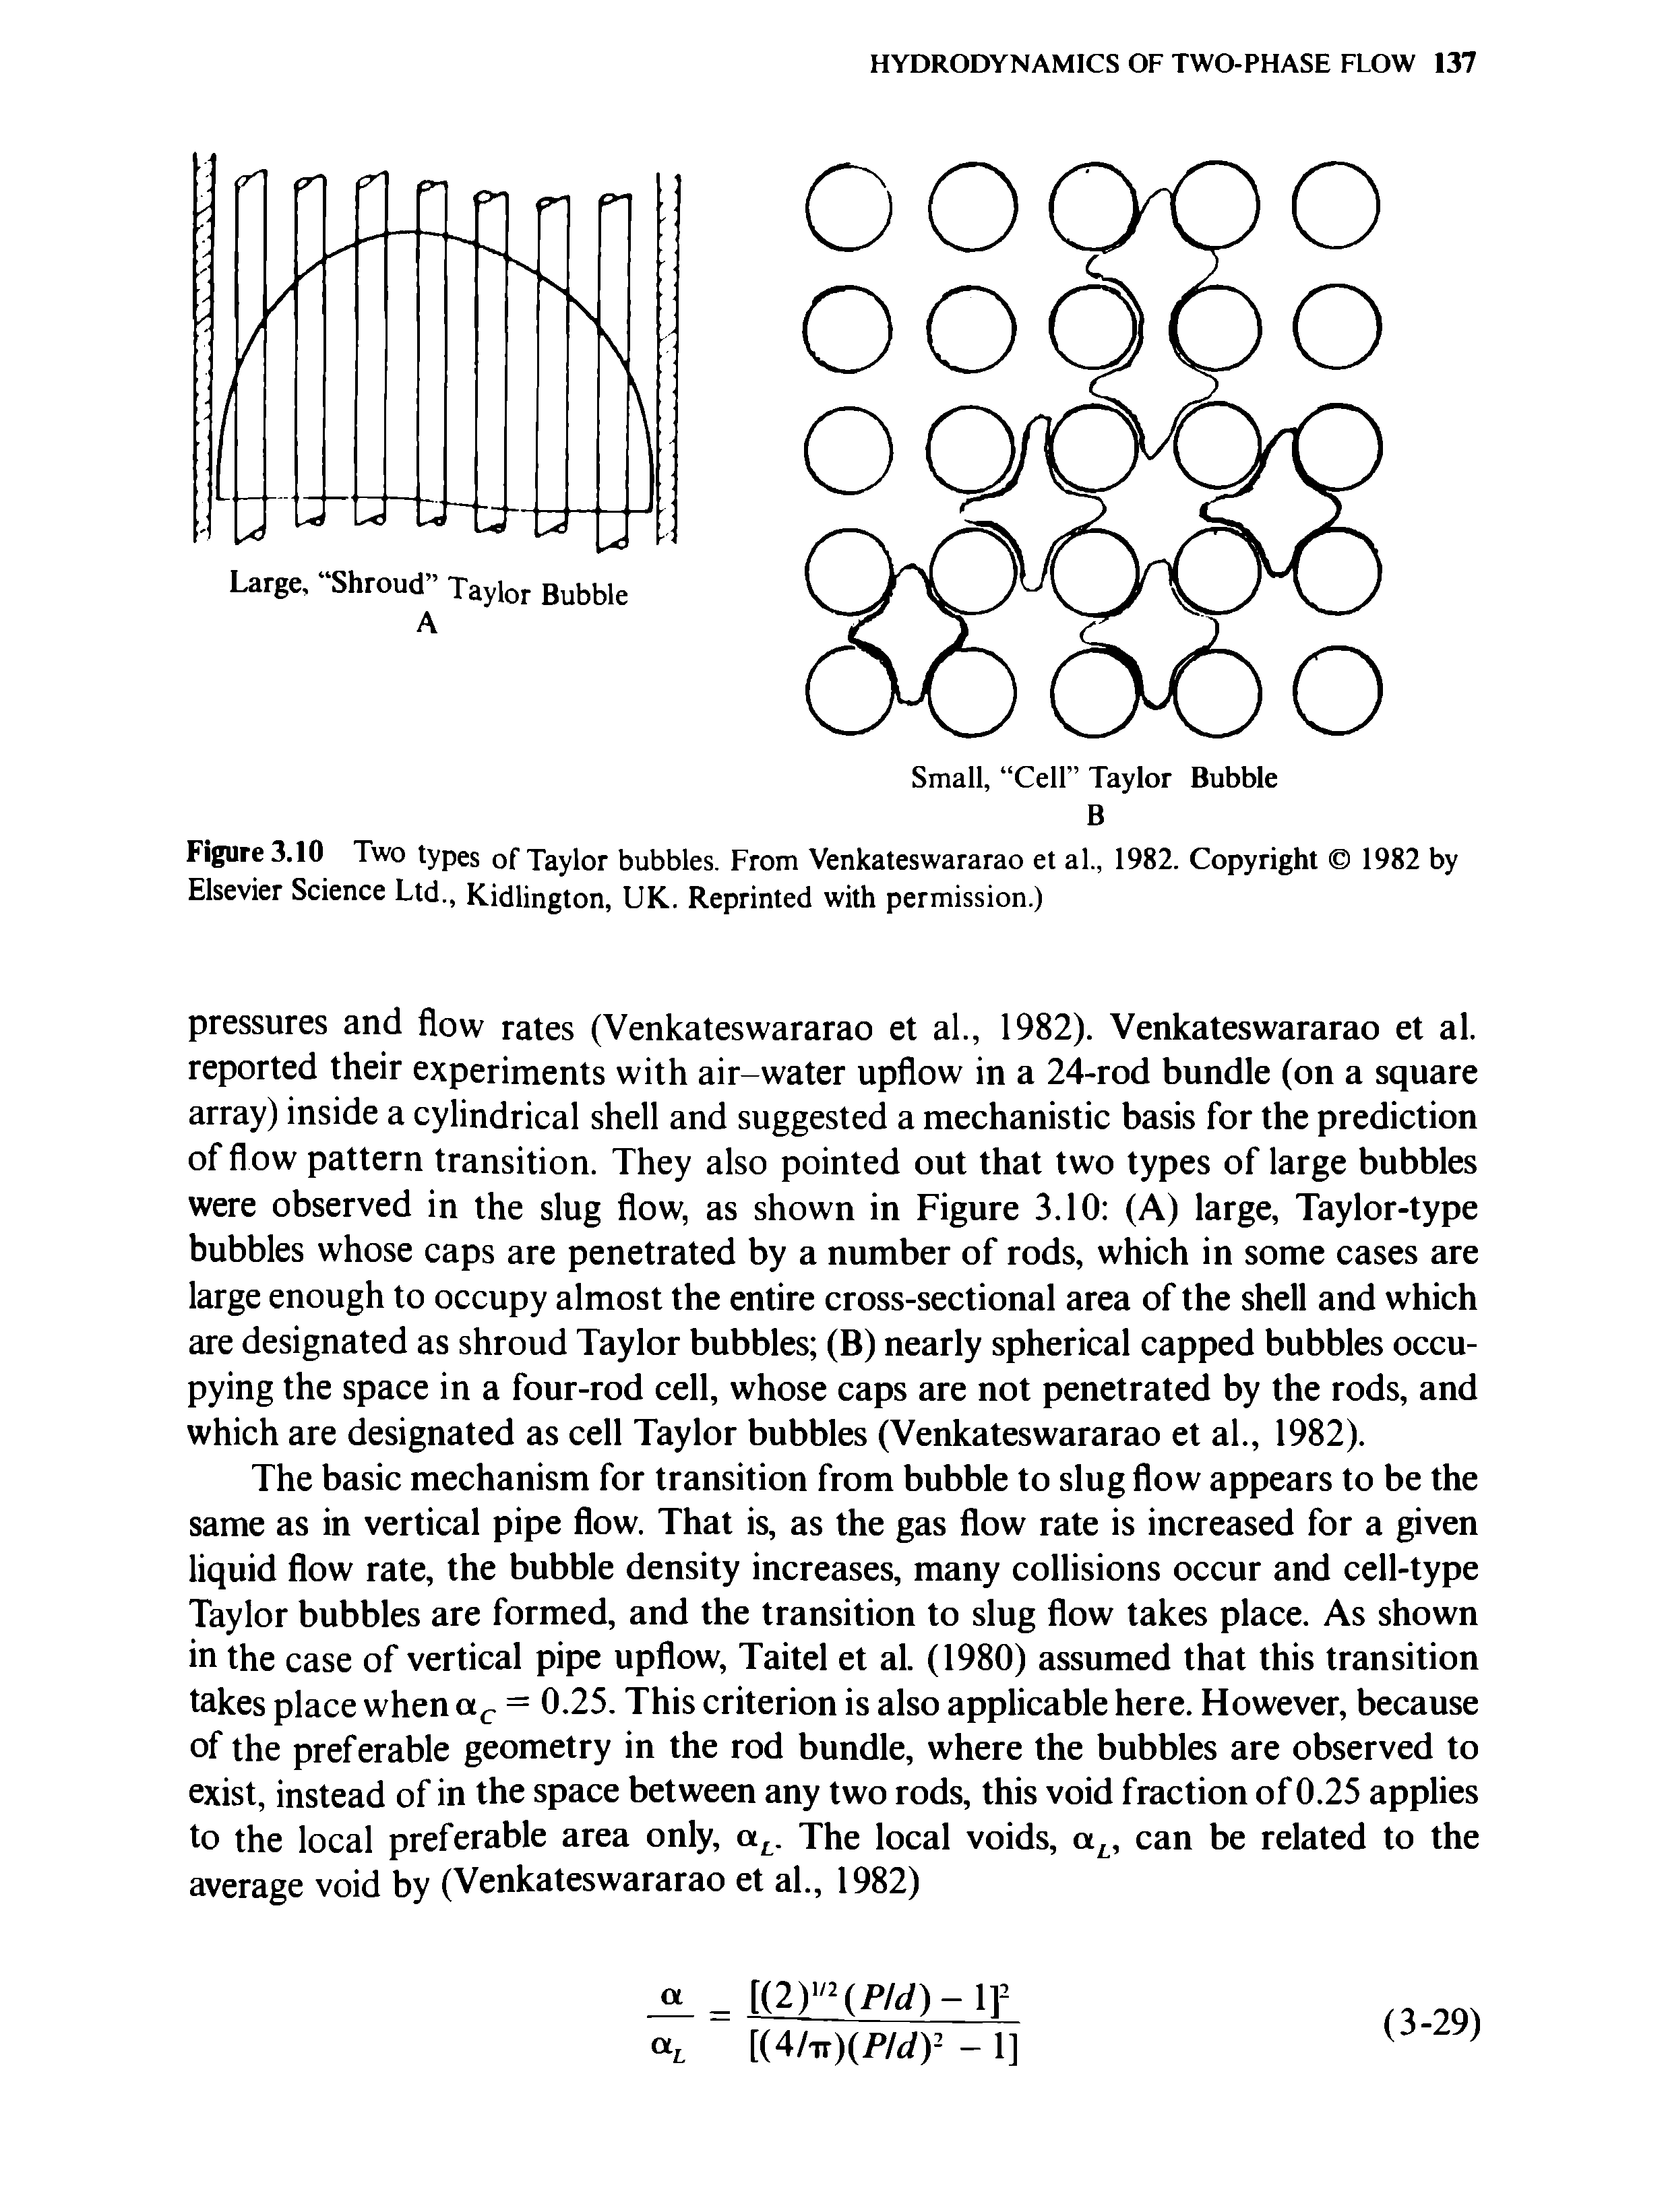 Figure 3.10 Two types of Taylor bubbles. From Venkateswararao et al., 1982. Copyright 1982 by Elsevier Science Ltd., Kidlington, UK. Reprinted with permission.)...